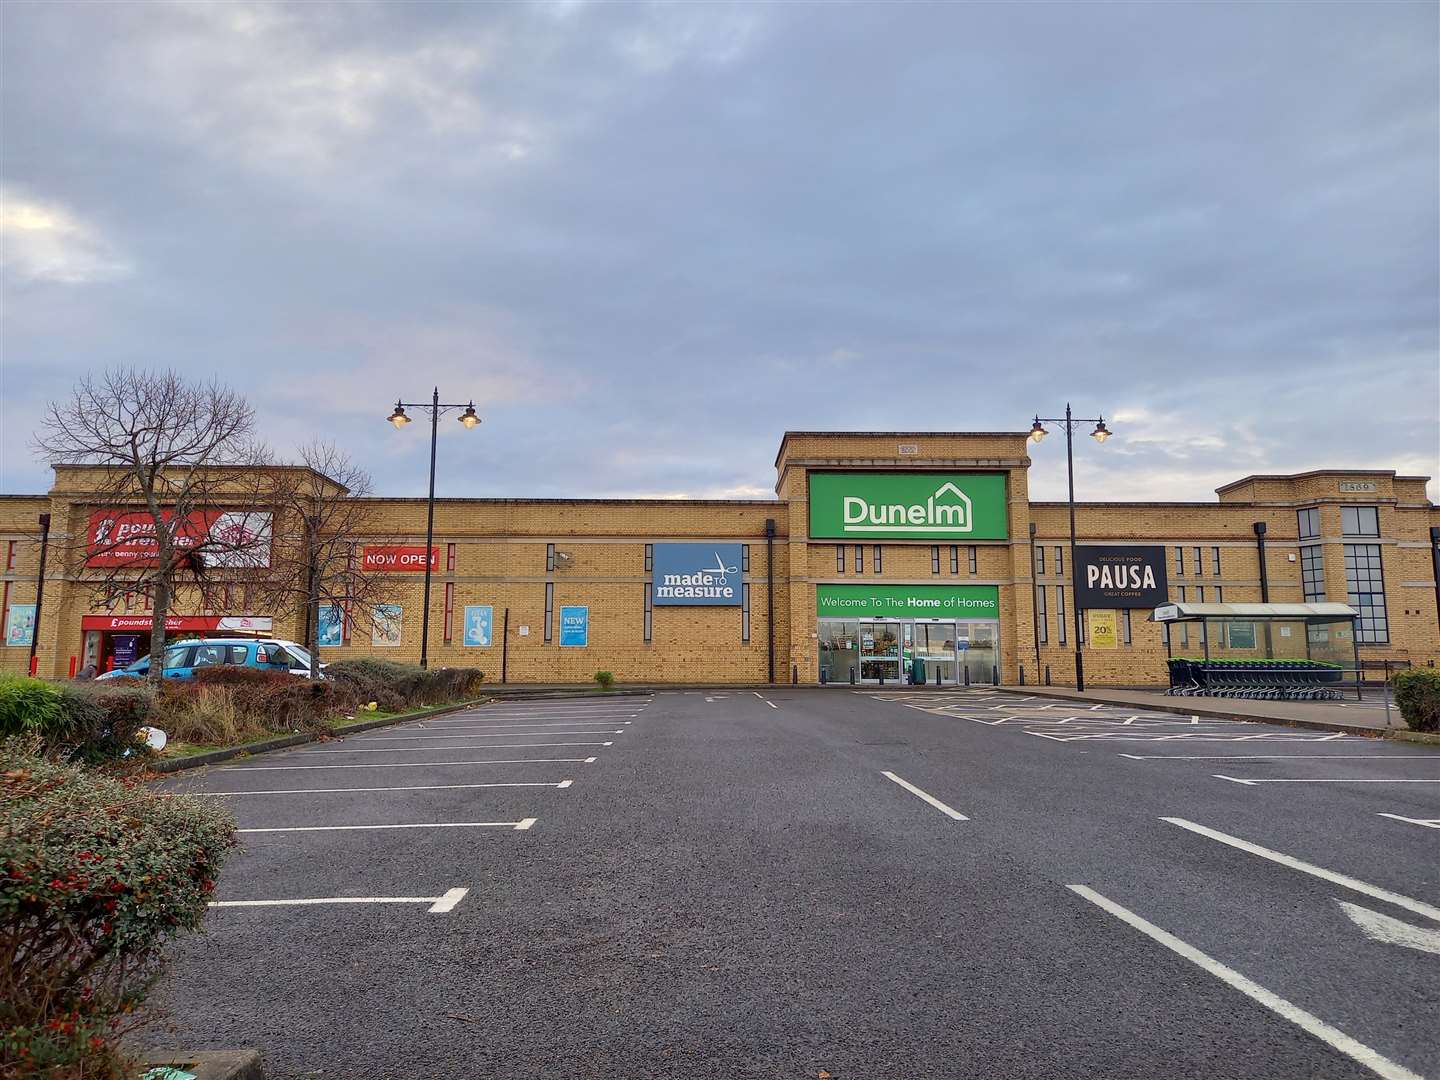 Dunelm is now without a neighbour